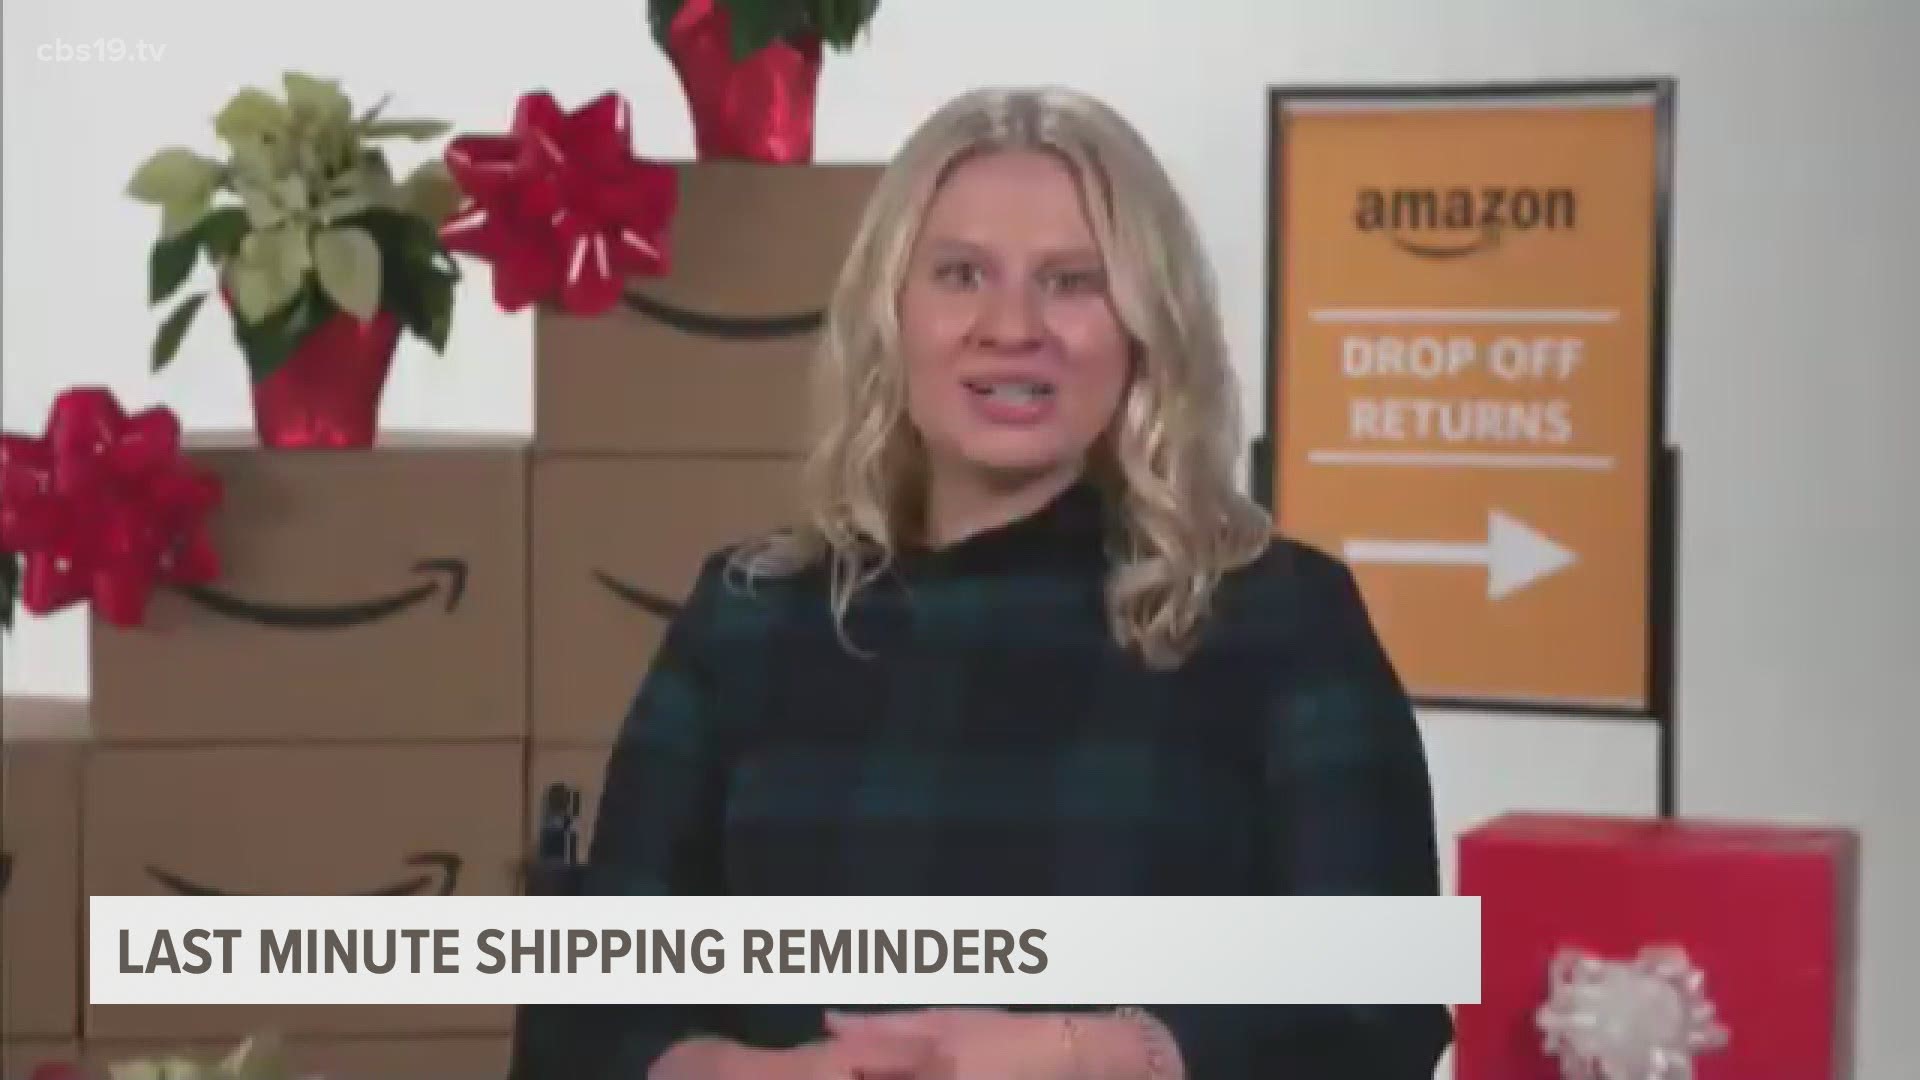 Have you shipped your holiday gifts yet? It's not too late, head to the post office today!